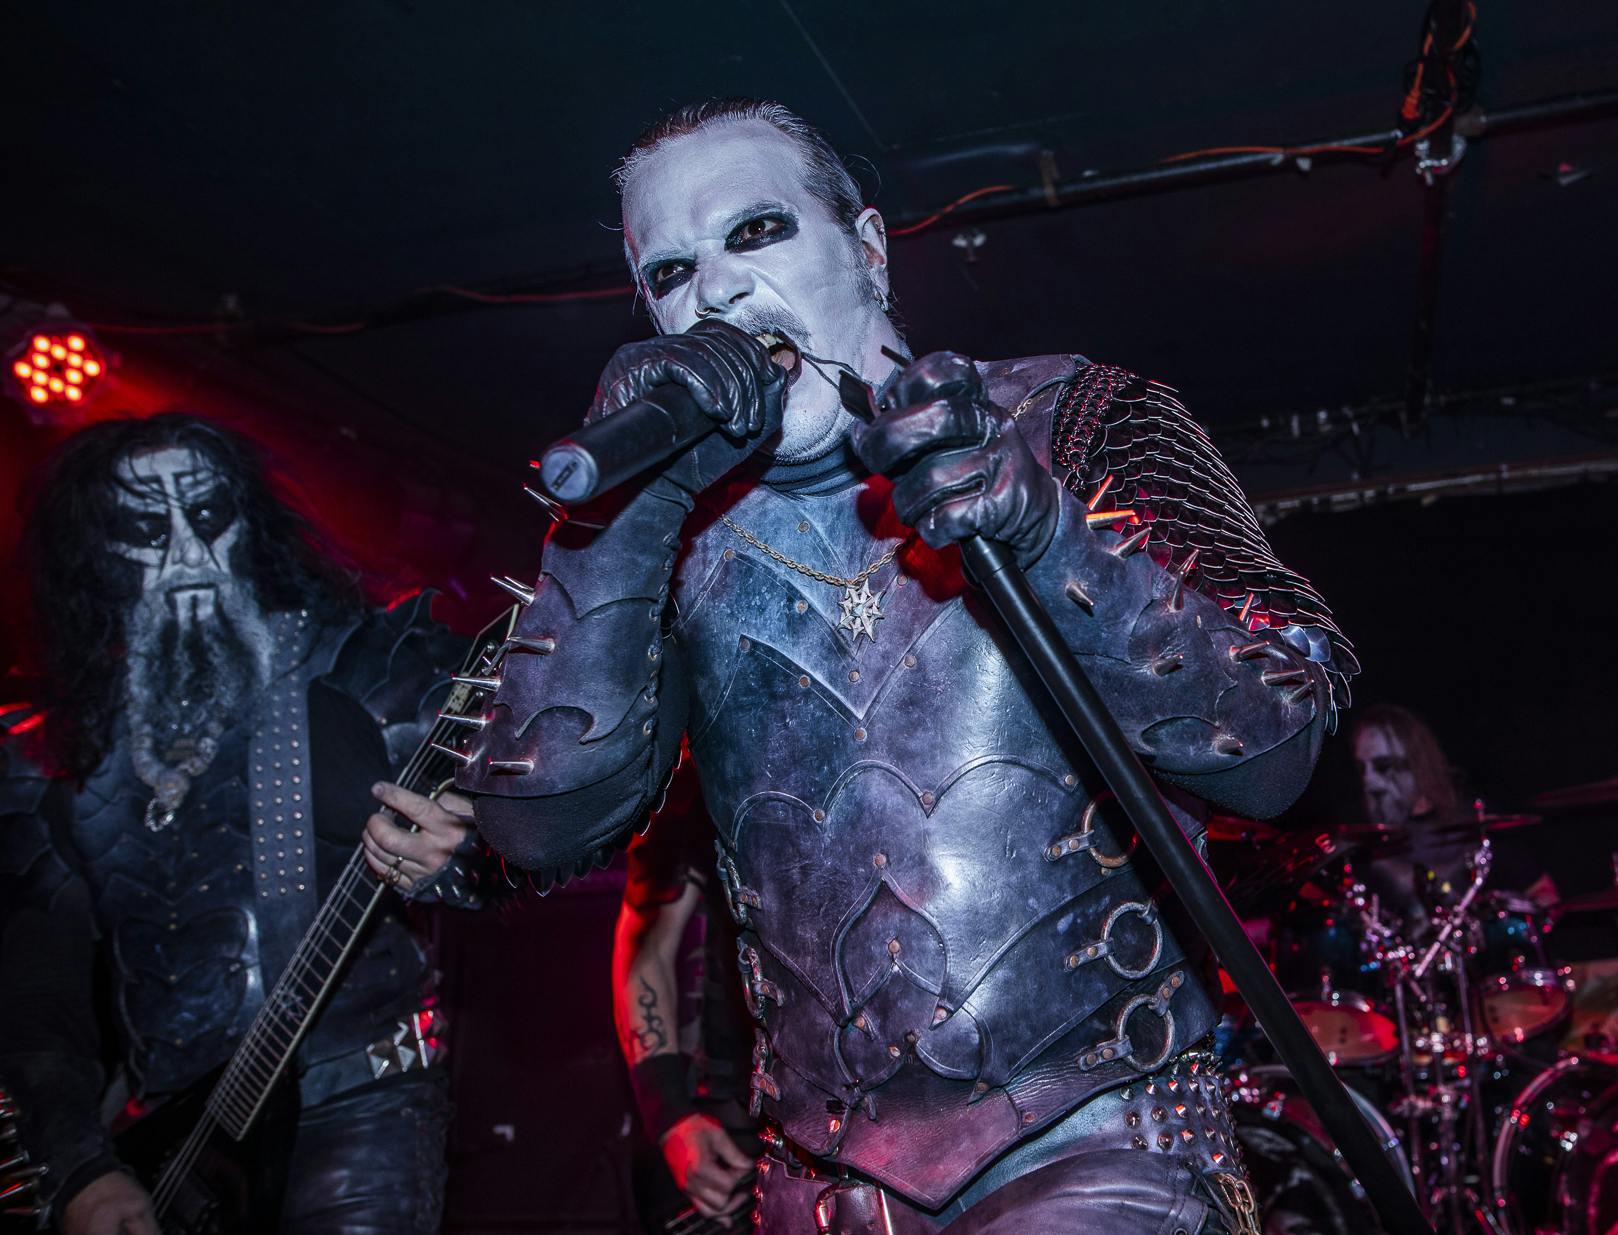 Dark Funeral's Stage Outfits Have Been Stolen